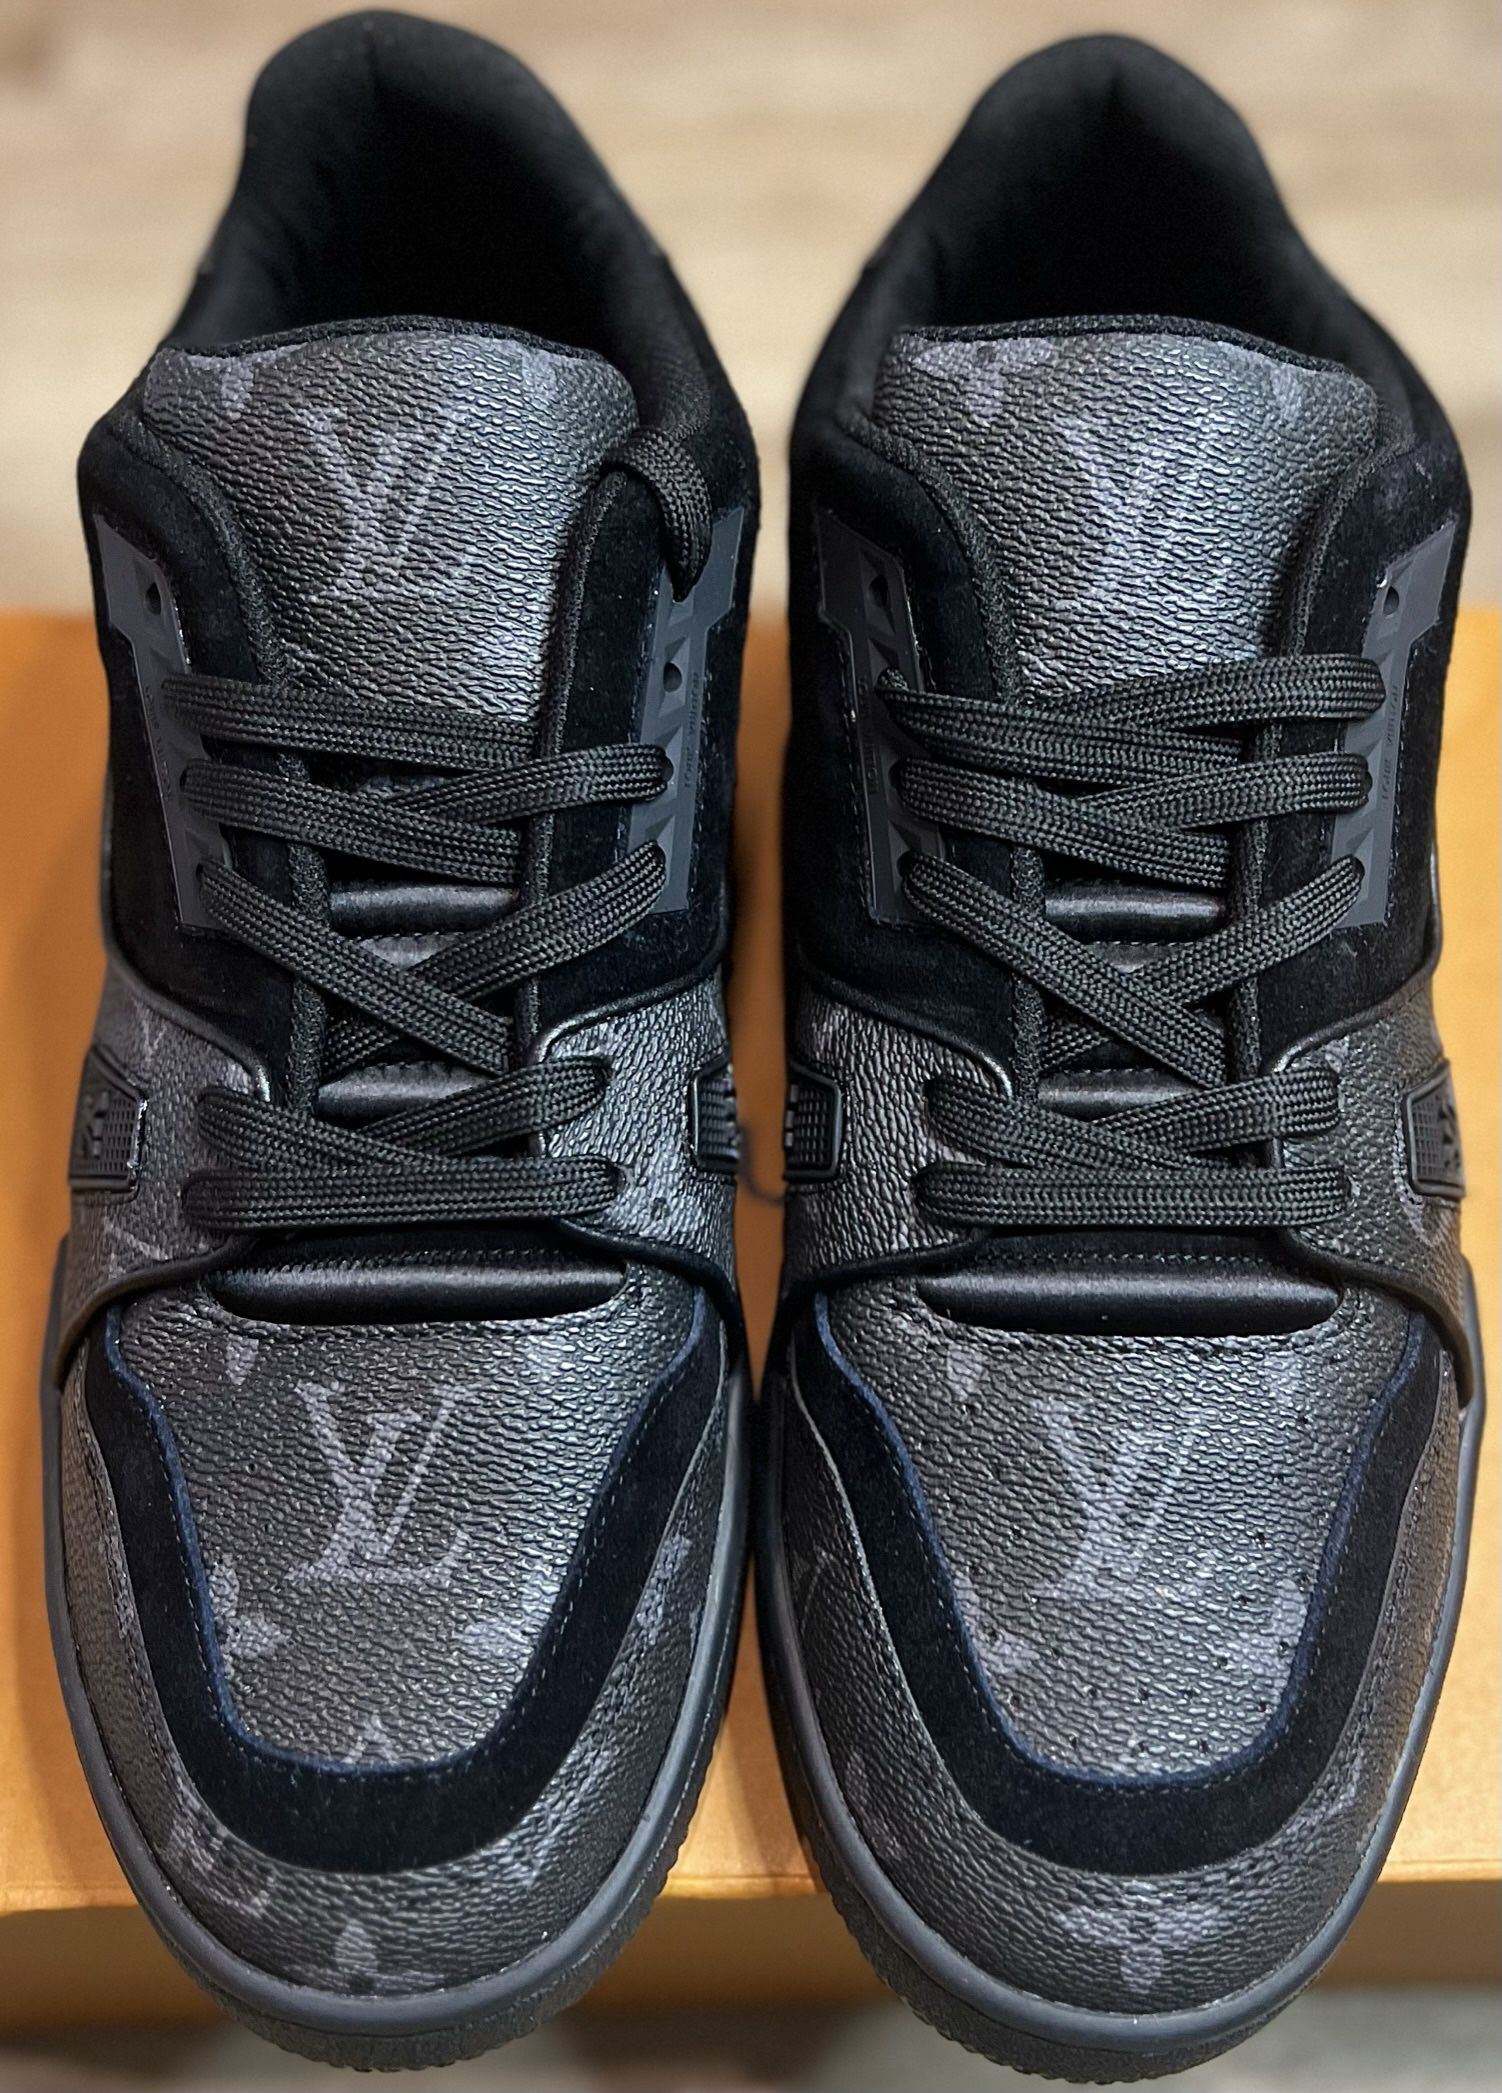 Louis Vuitton Sneakers Brand New With Box And Dust Bag. Men Size 8, 9, 10,  11, 12. Pickup. 320$ for Sale in Houston, TX - OfferUp